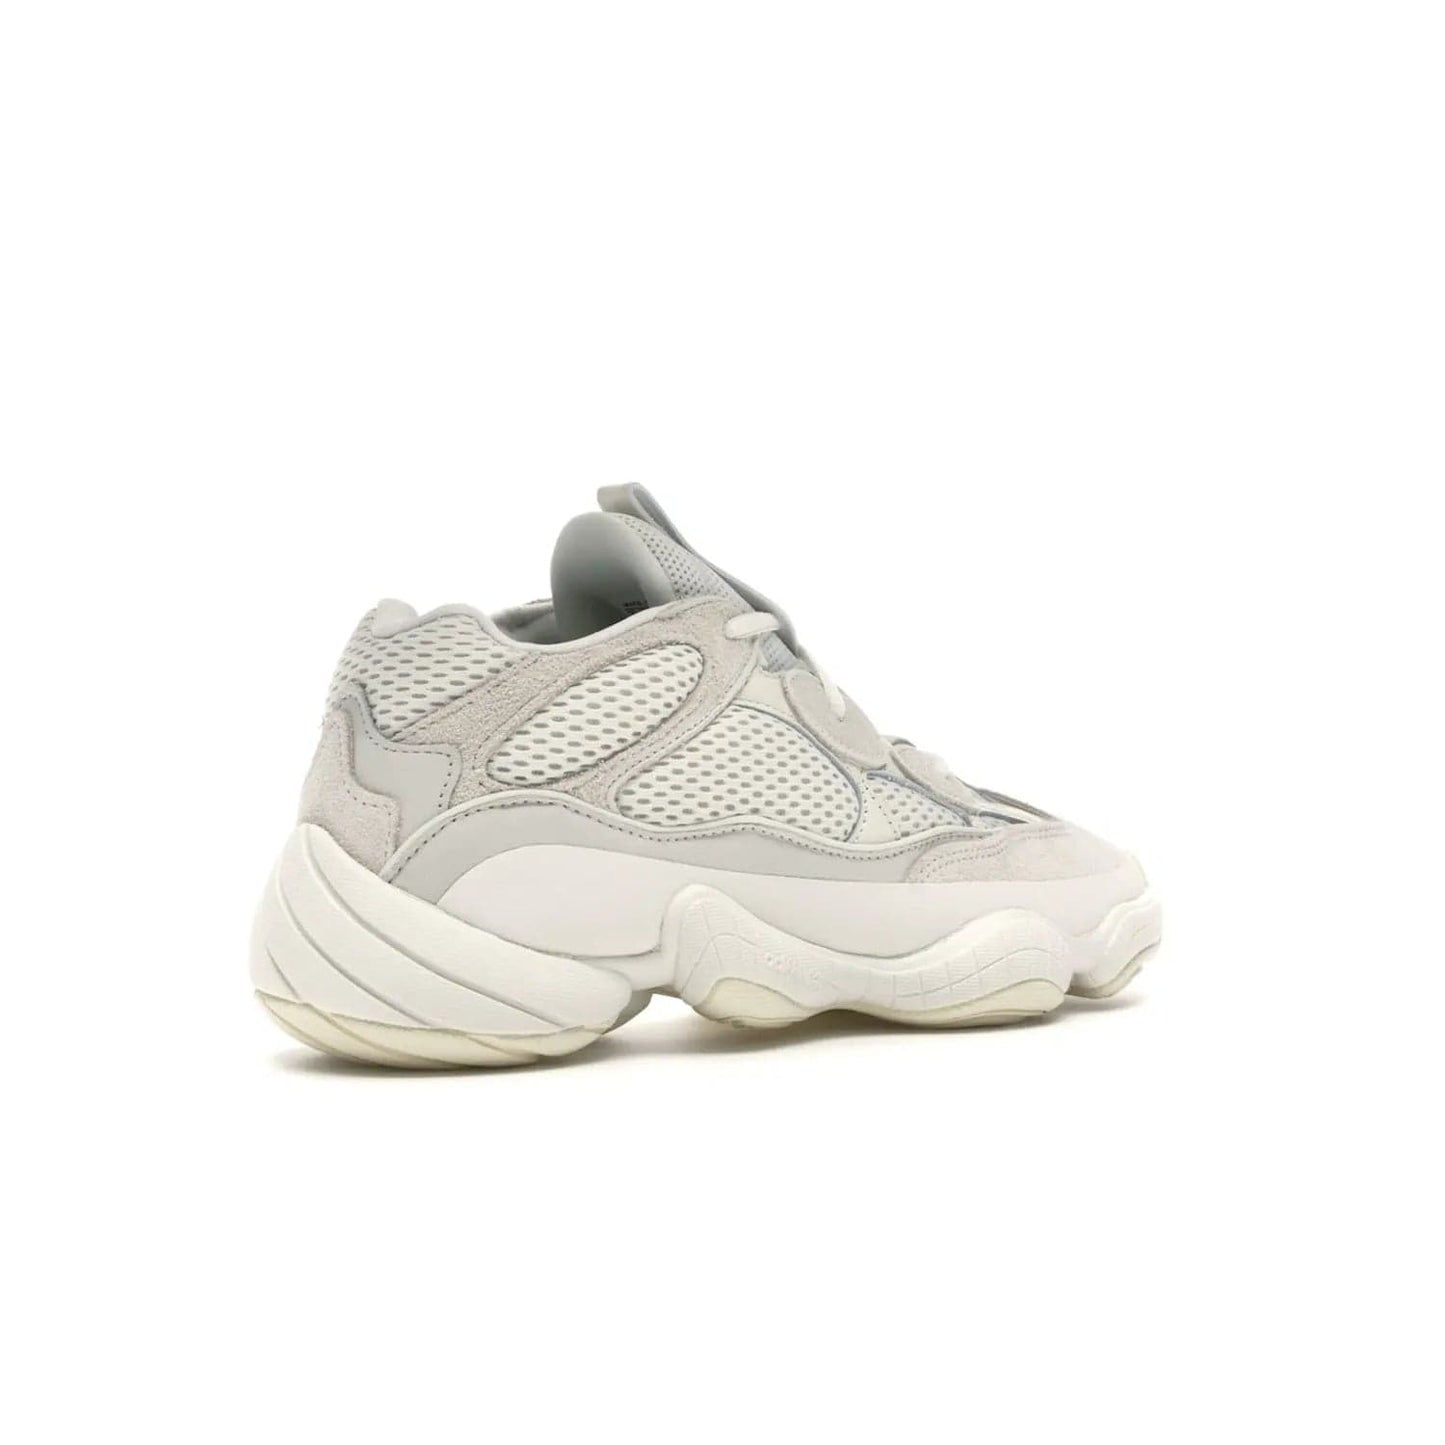 adidas Yeezy 500 Bone White - Image 33 - Only at www.BallersClubKickz.com - Classic look perfect for any sneaker collection. The adidas Yeezy 500 "Bone White" blends a white mesh upper with suede overlays & a chunky midsole inspired by the Adidas KB3. Complimented by a tonal-cream outsole, this timeless style is a must-have.